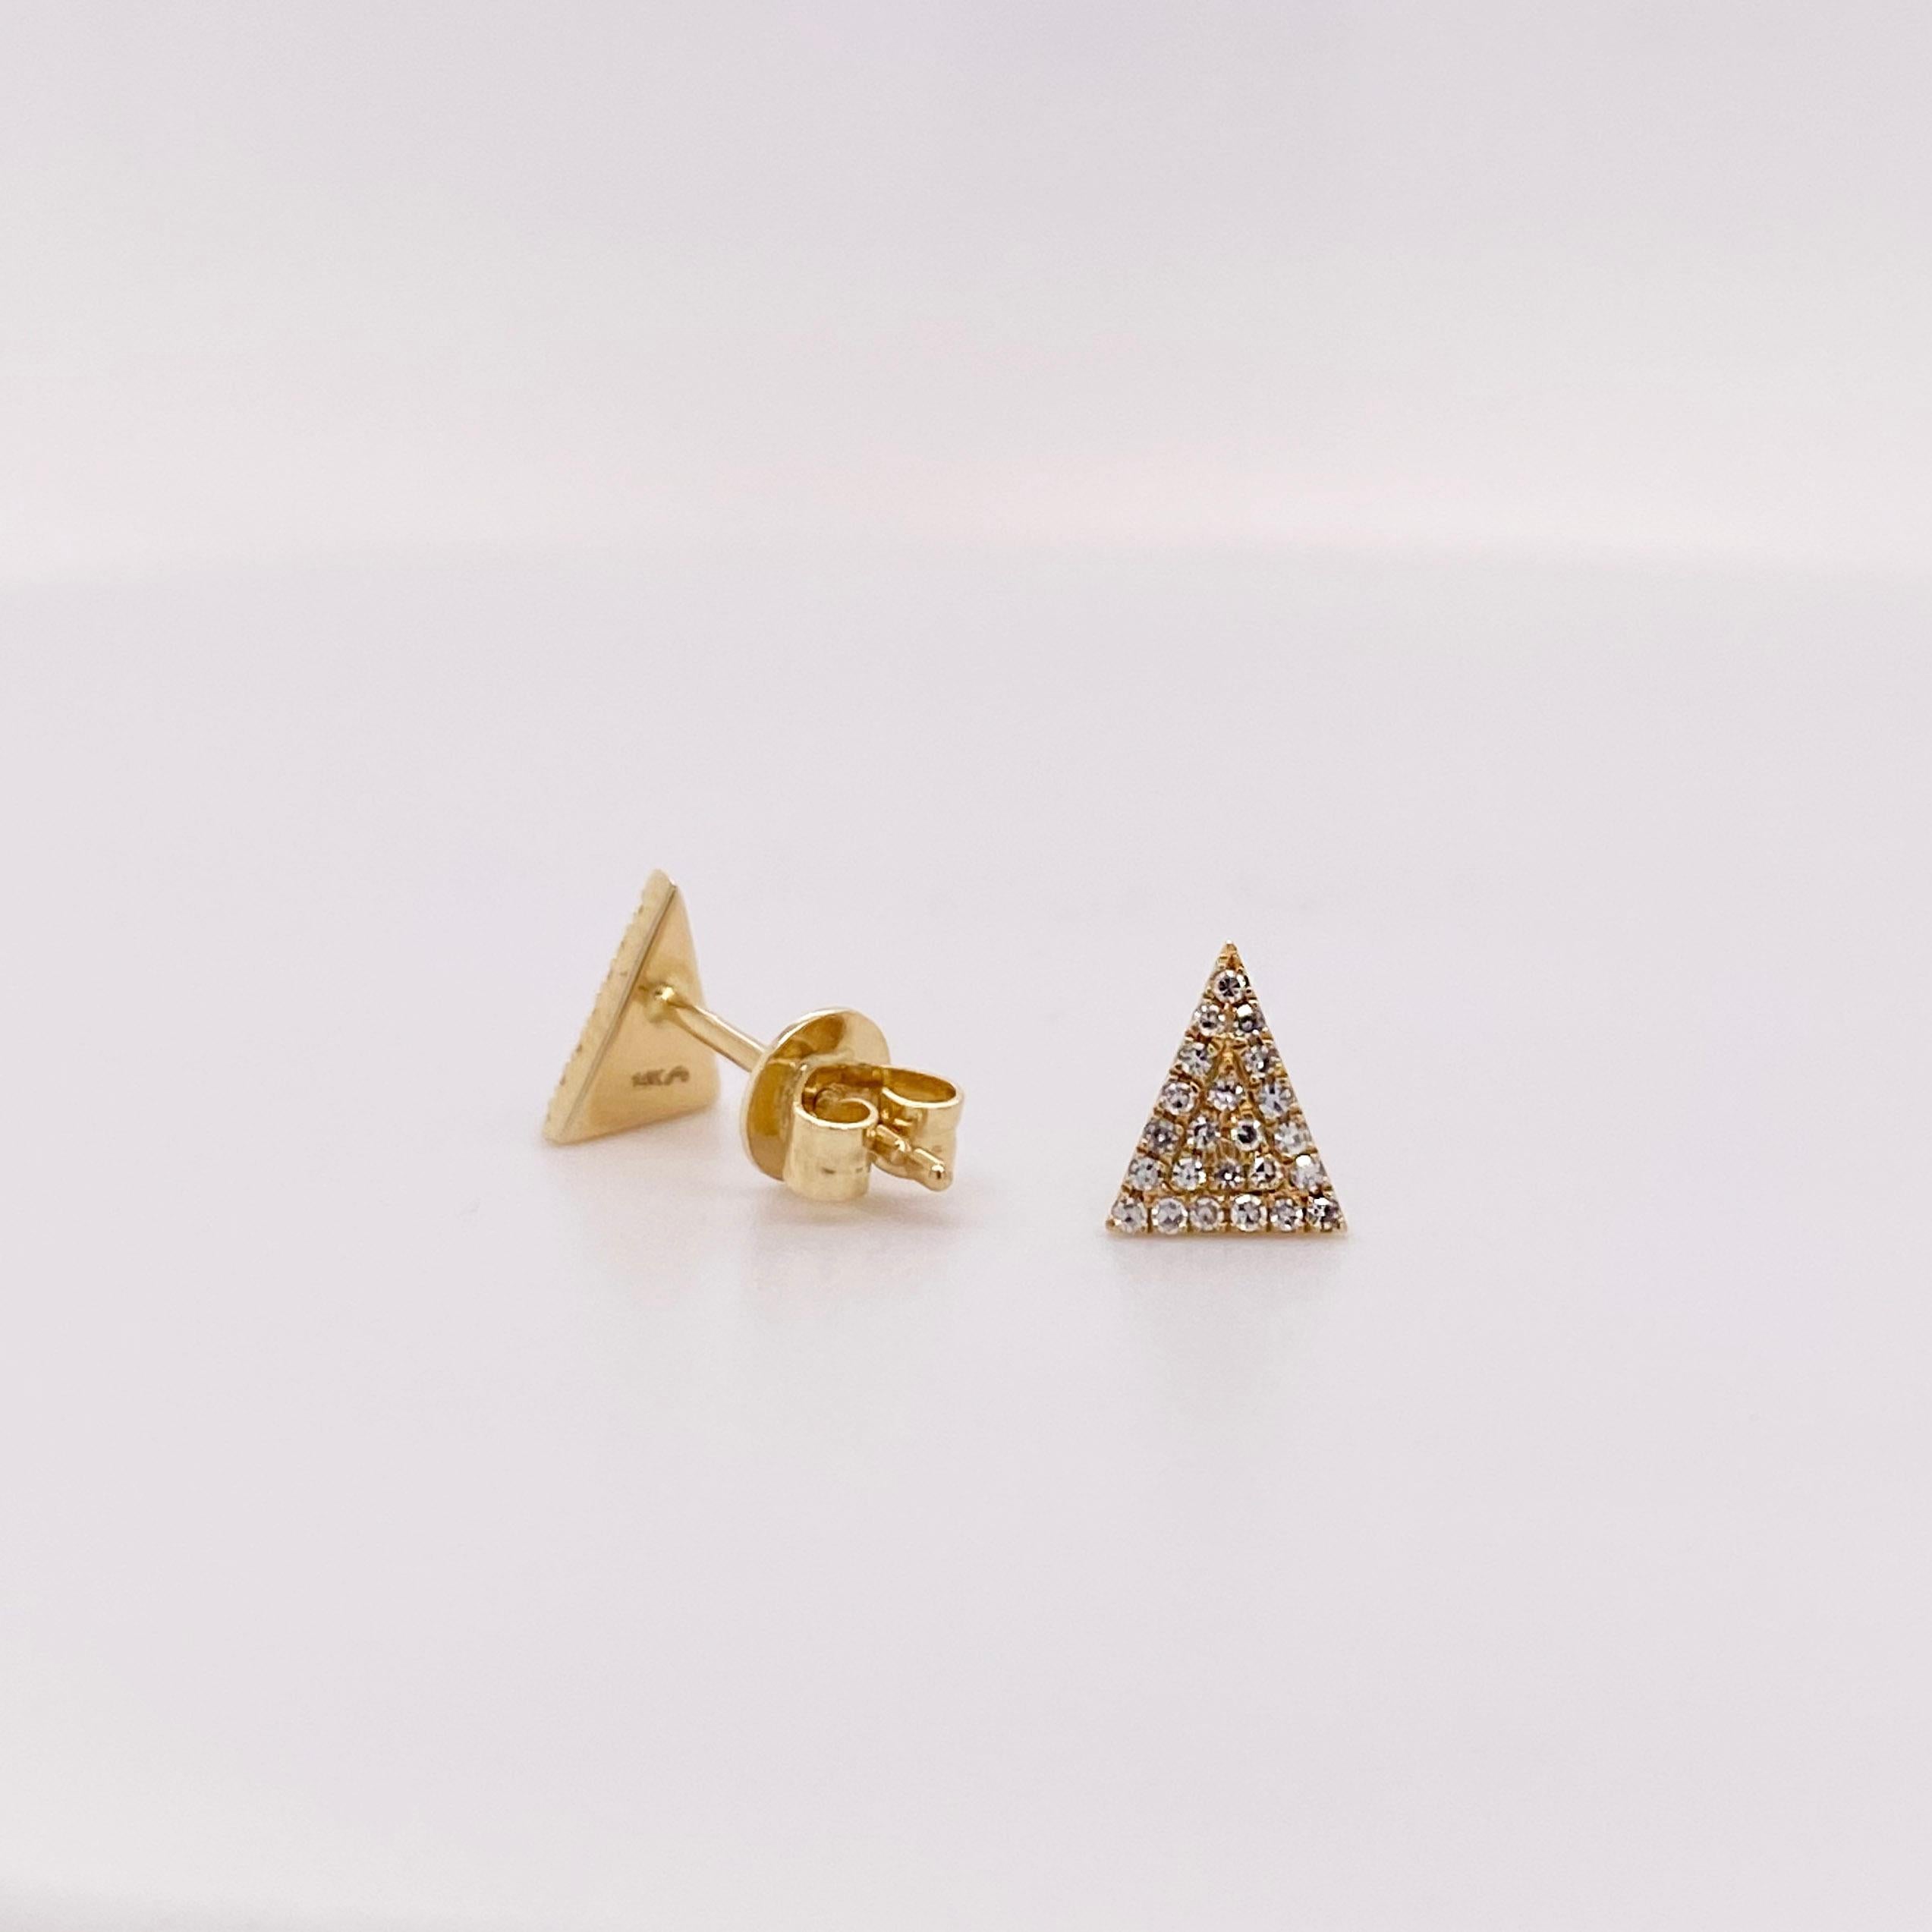 Gorgeous diamonds studs are the perfect addition to any fine jewelry collection! This pave diamond design is unique and trendy. Wear these as your signature studs or pair them with other earrings for a custom stack! 

The details for these gorgeous